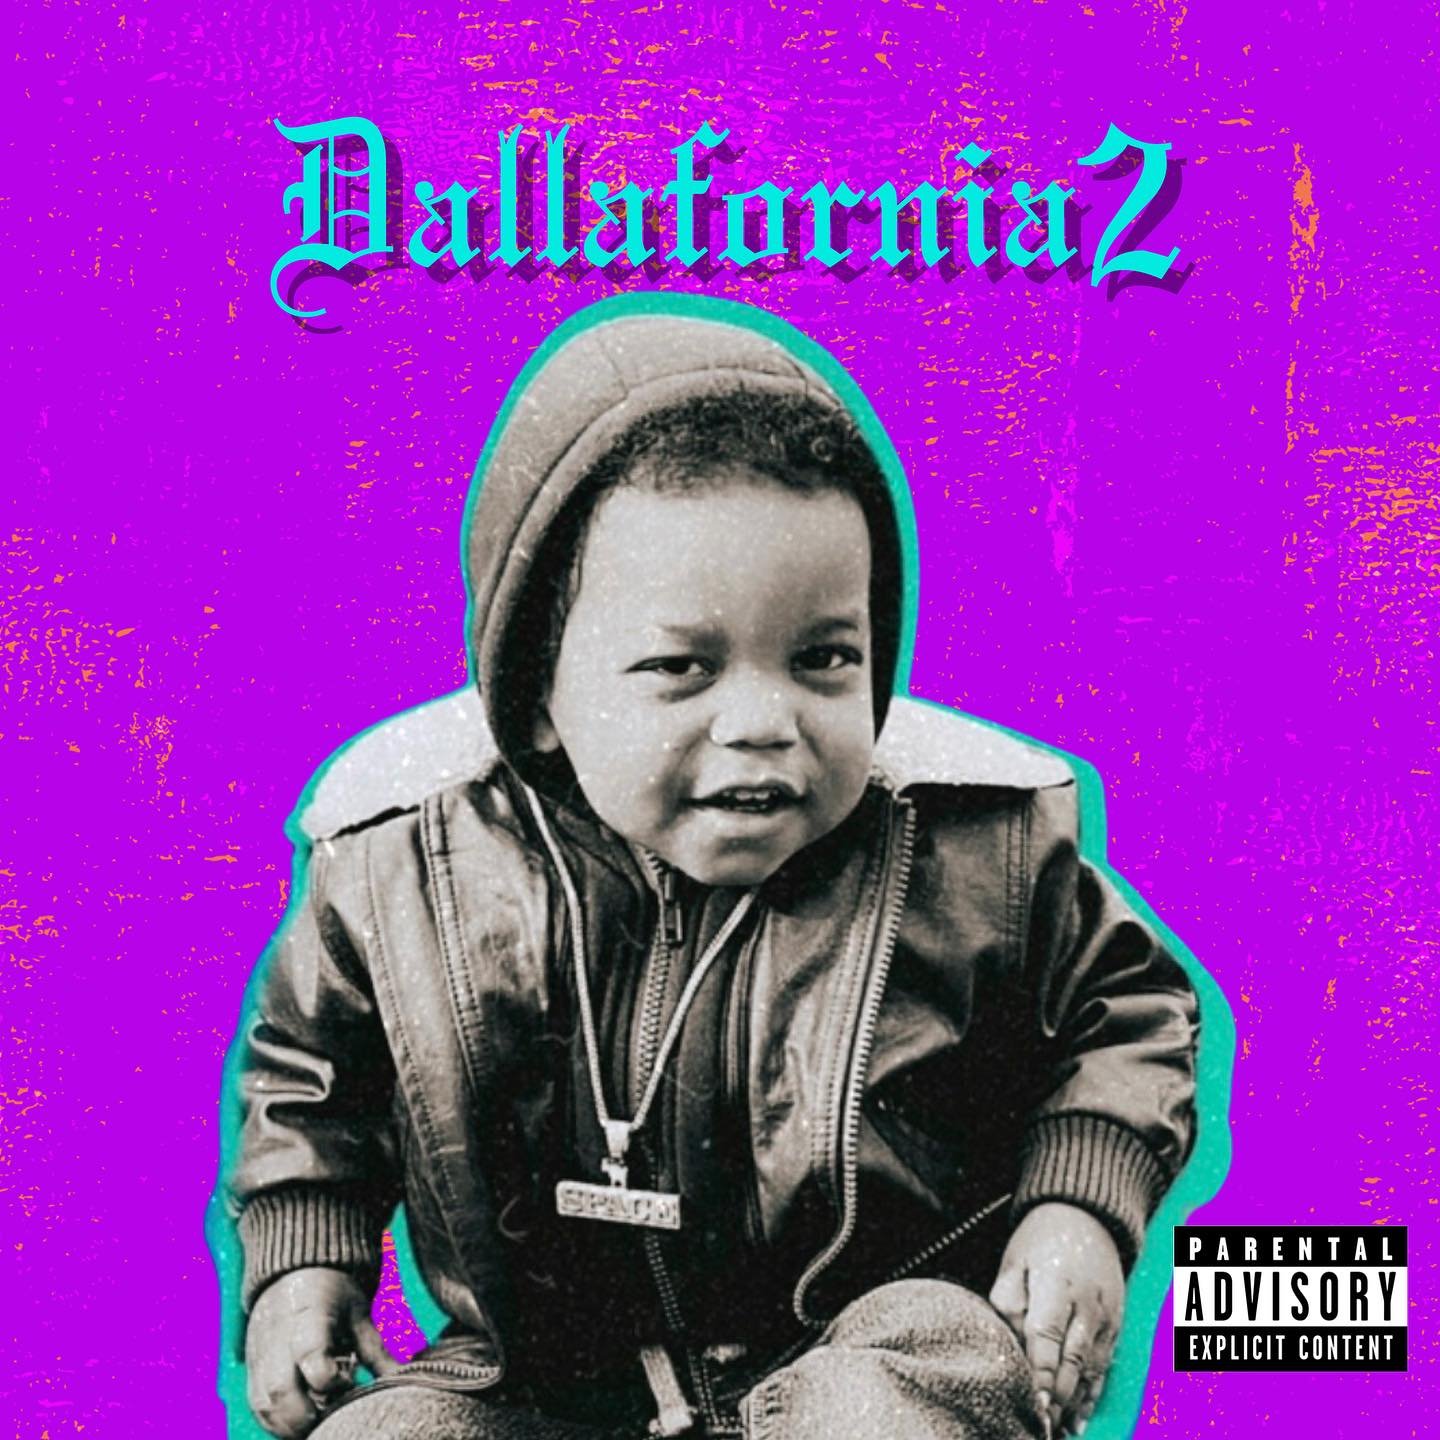 I chose my son to be on the album cover because he&rsquo;s like the part 2 version of me. I won&rsquo;t lie, he already show signs of being the better design, what more could a parent ask for?

Dallafornia2 
4/20/2024
Only on www.spaceboifresh.world
